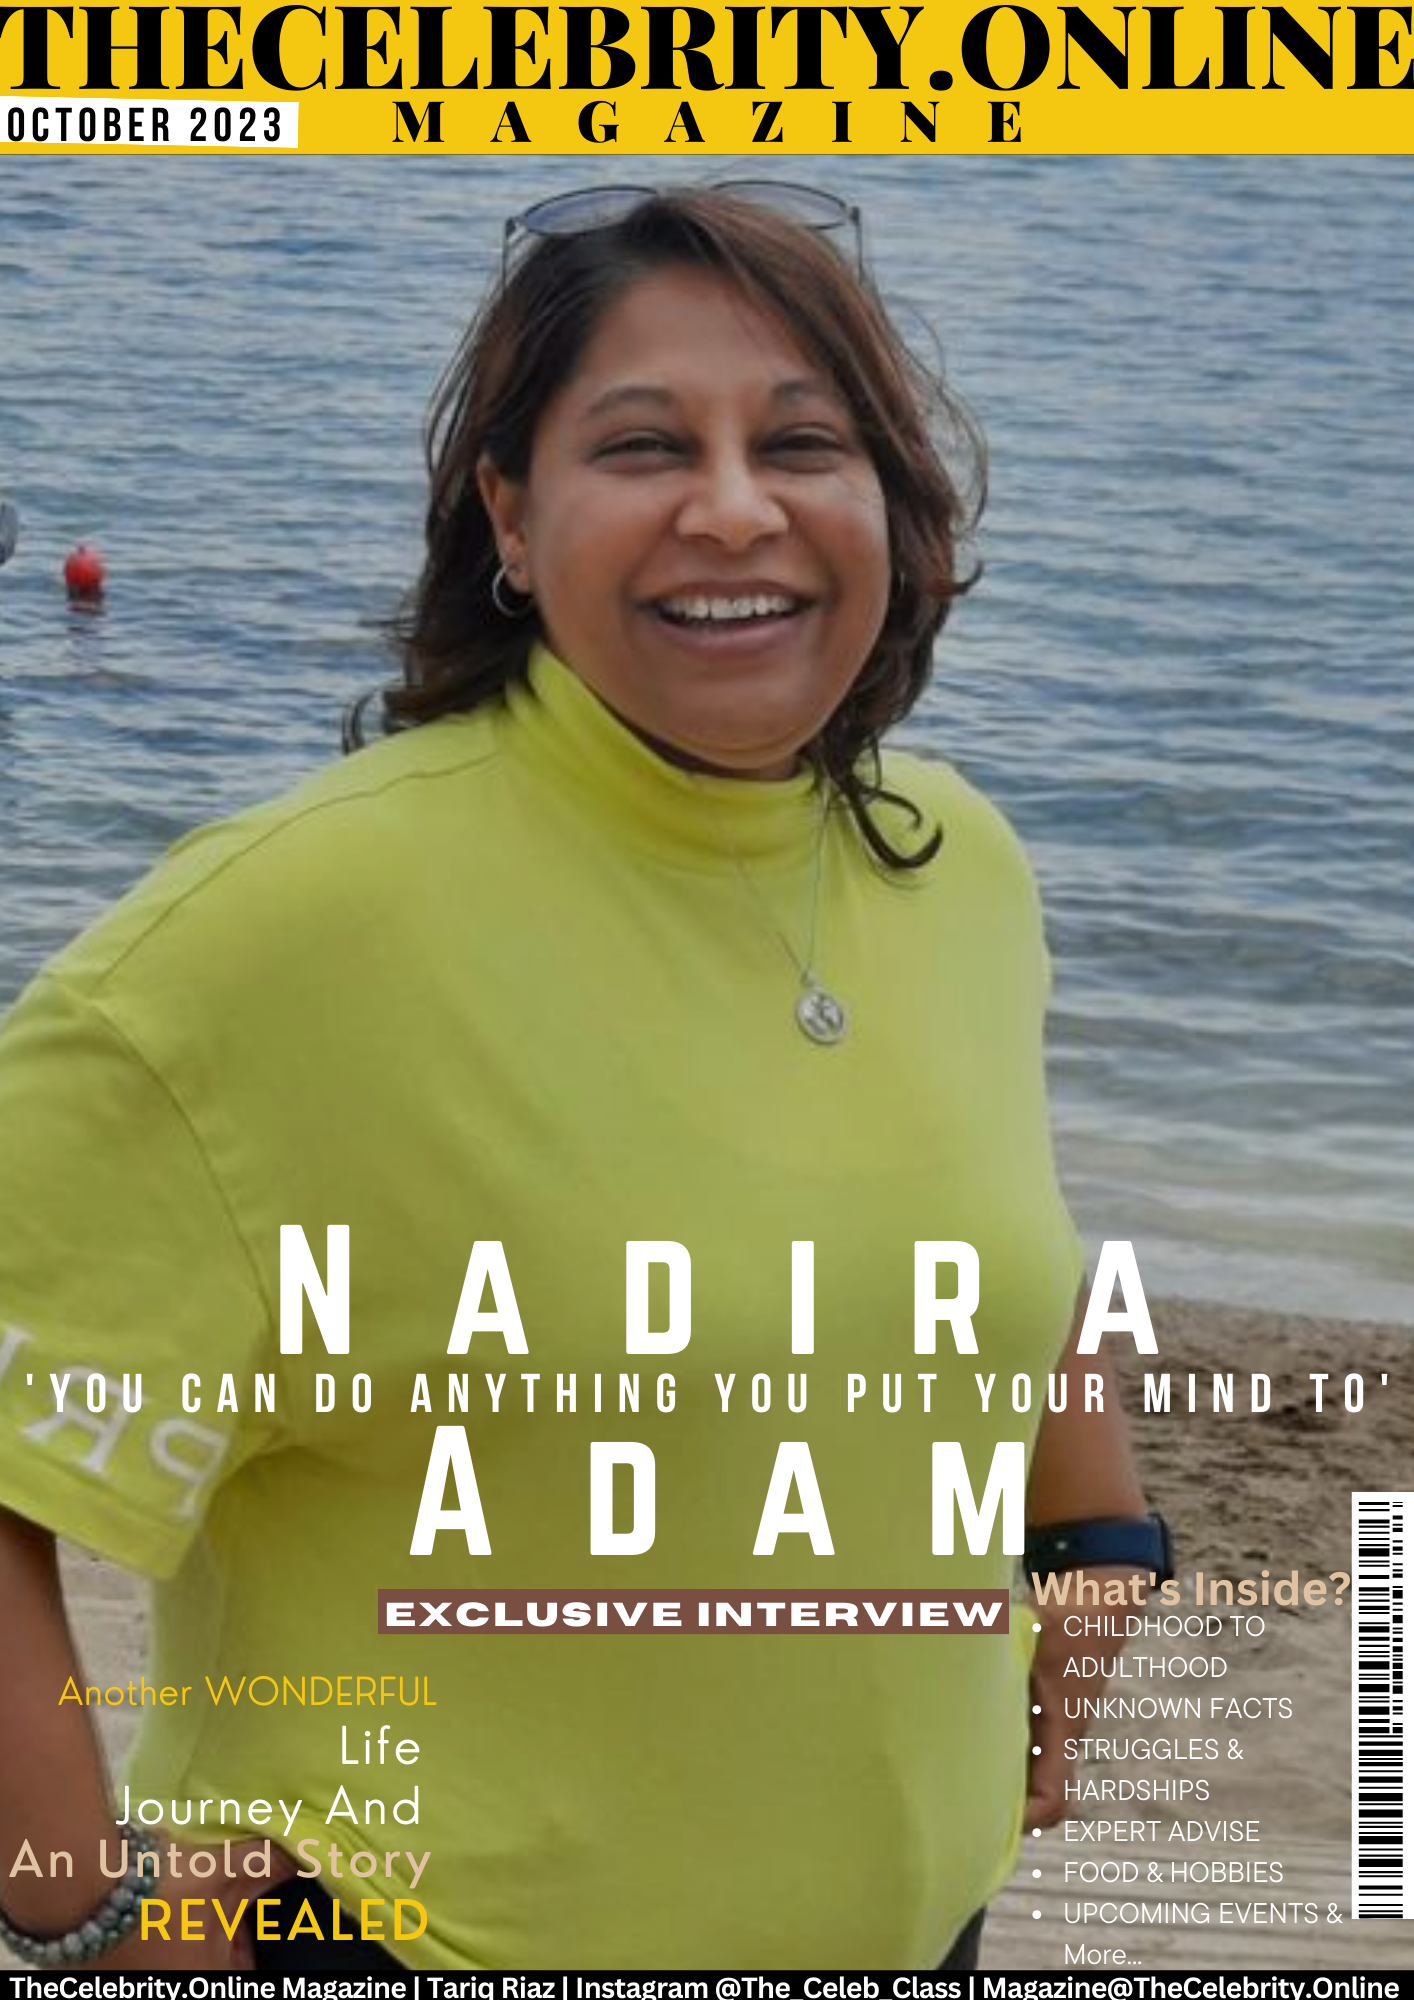 Nadira Adam Exclusive Interview – ‘You Can Do ANYTHING You Put Your Mind To’